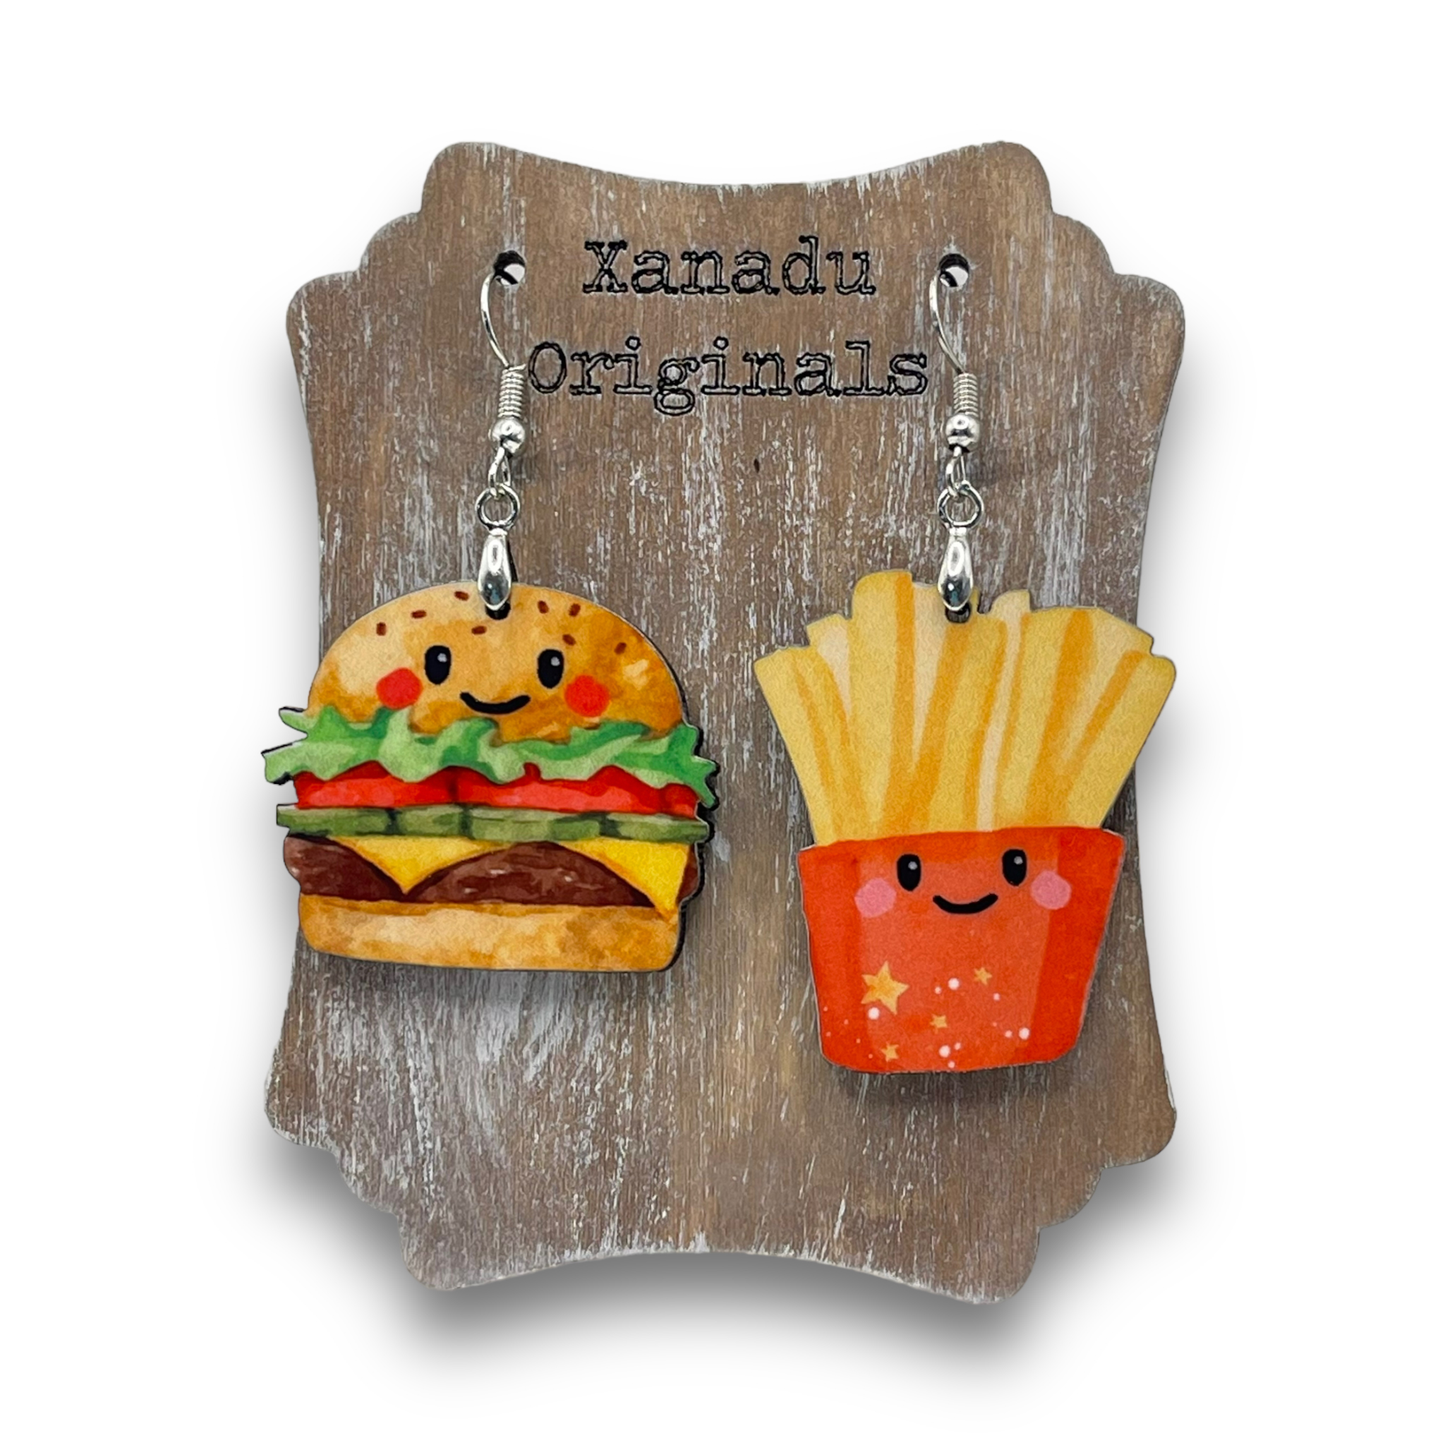 Burger and Fries Shaped Earrings